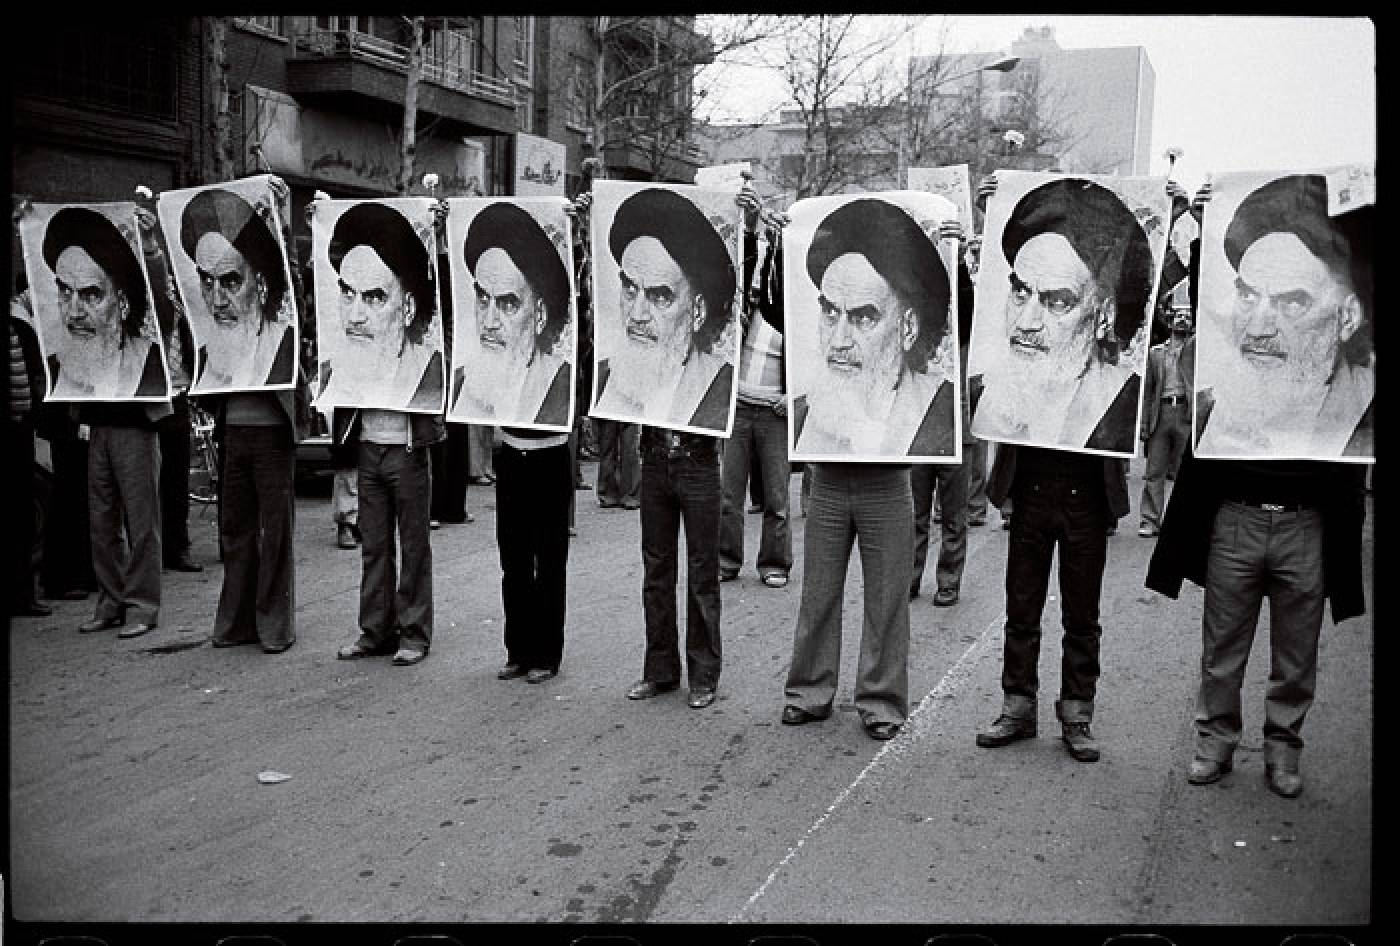 Panel: Unifying Perspectives on the Revolution in Iran - UBCevents